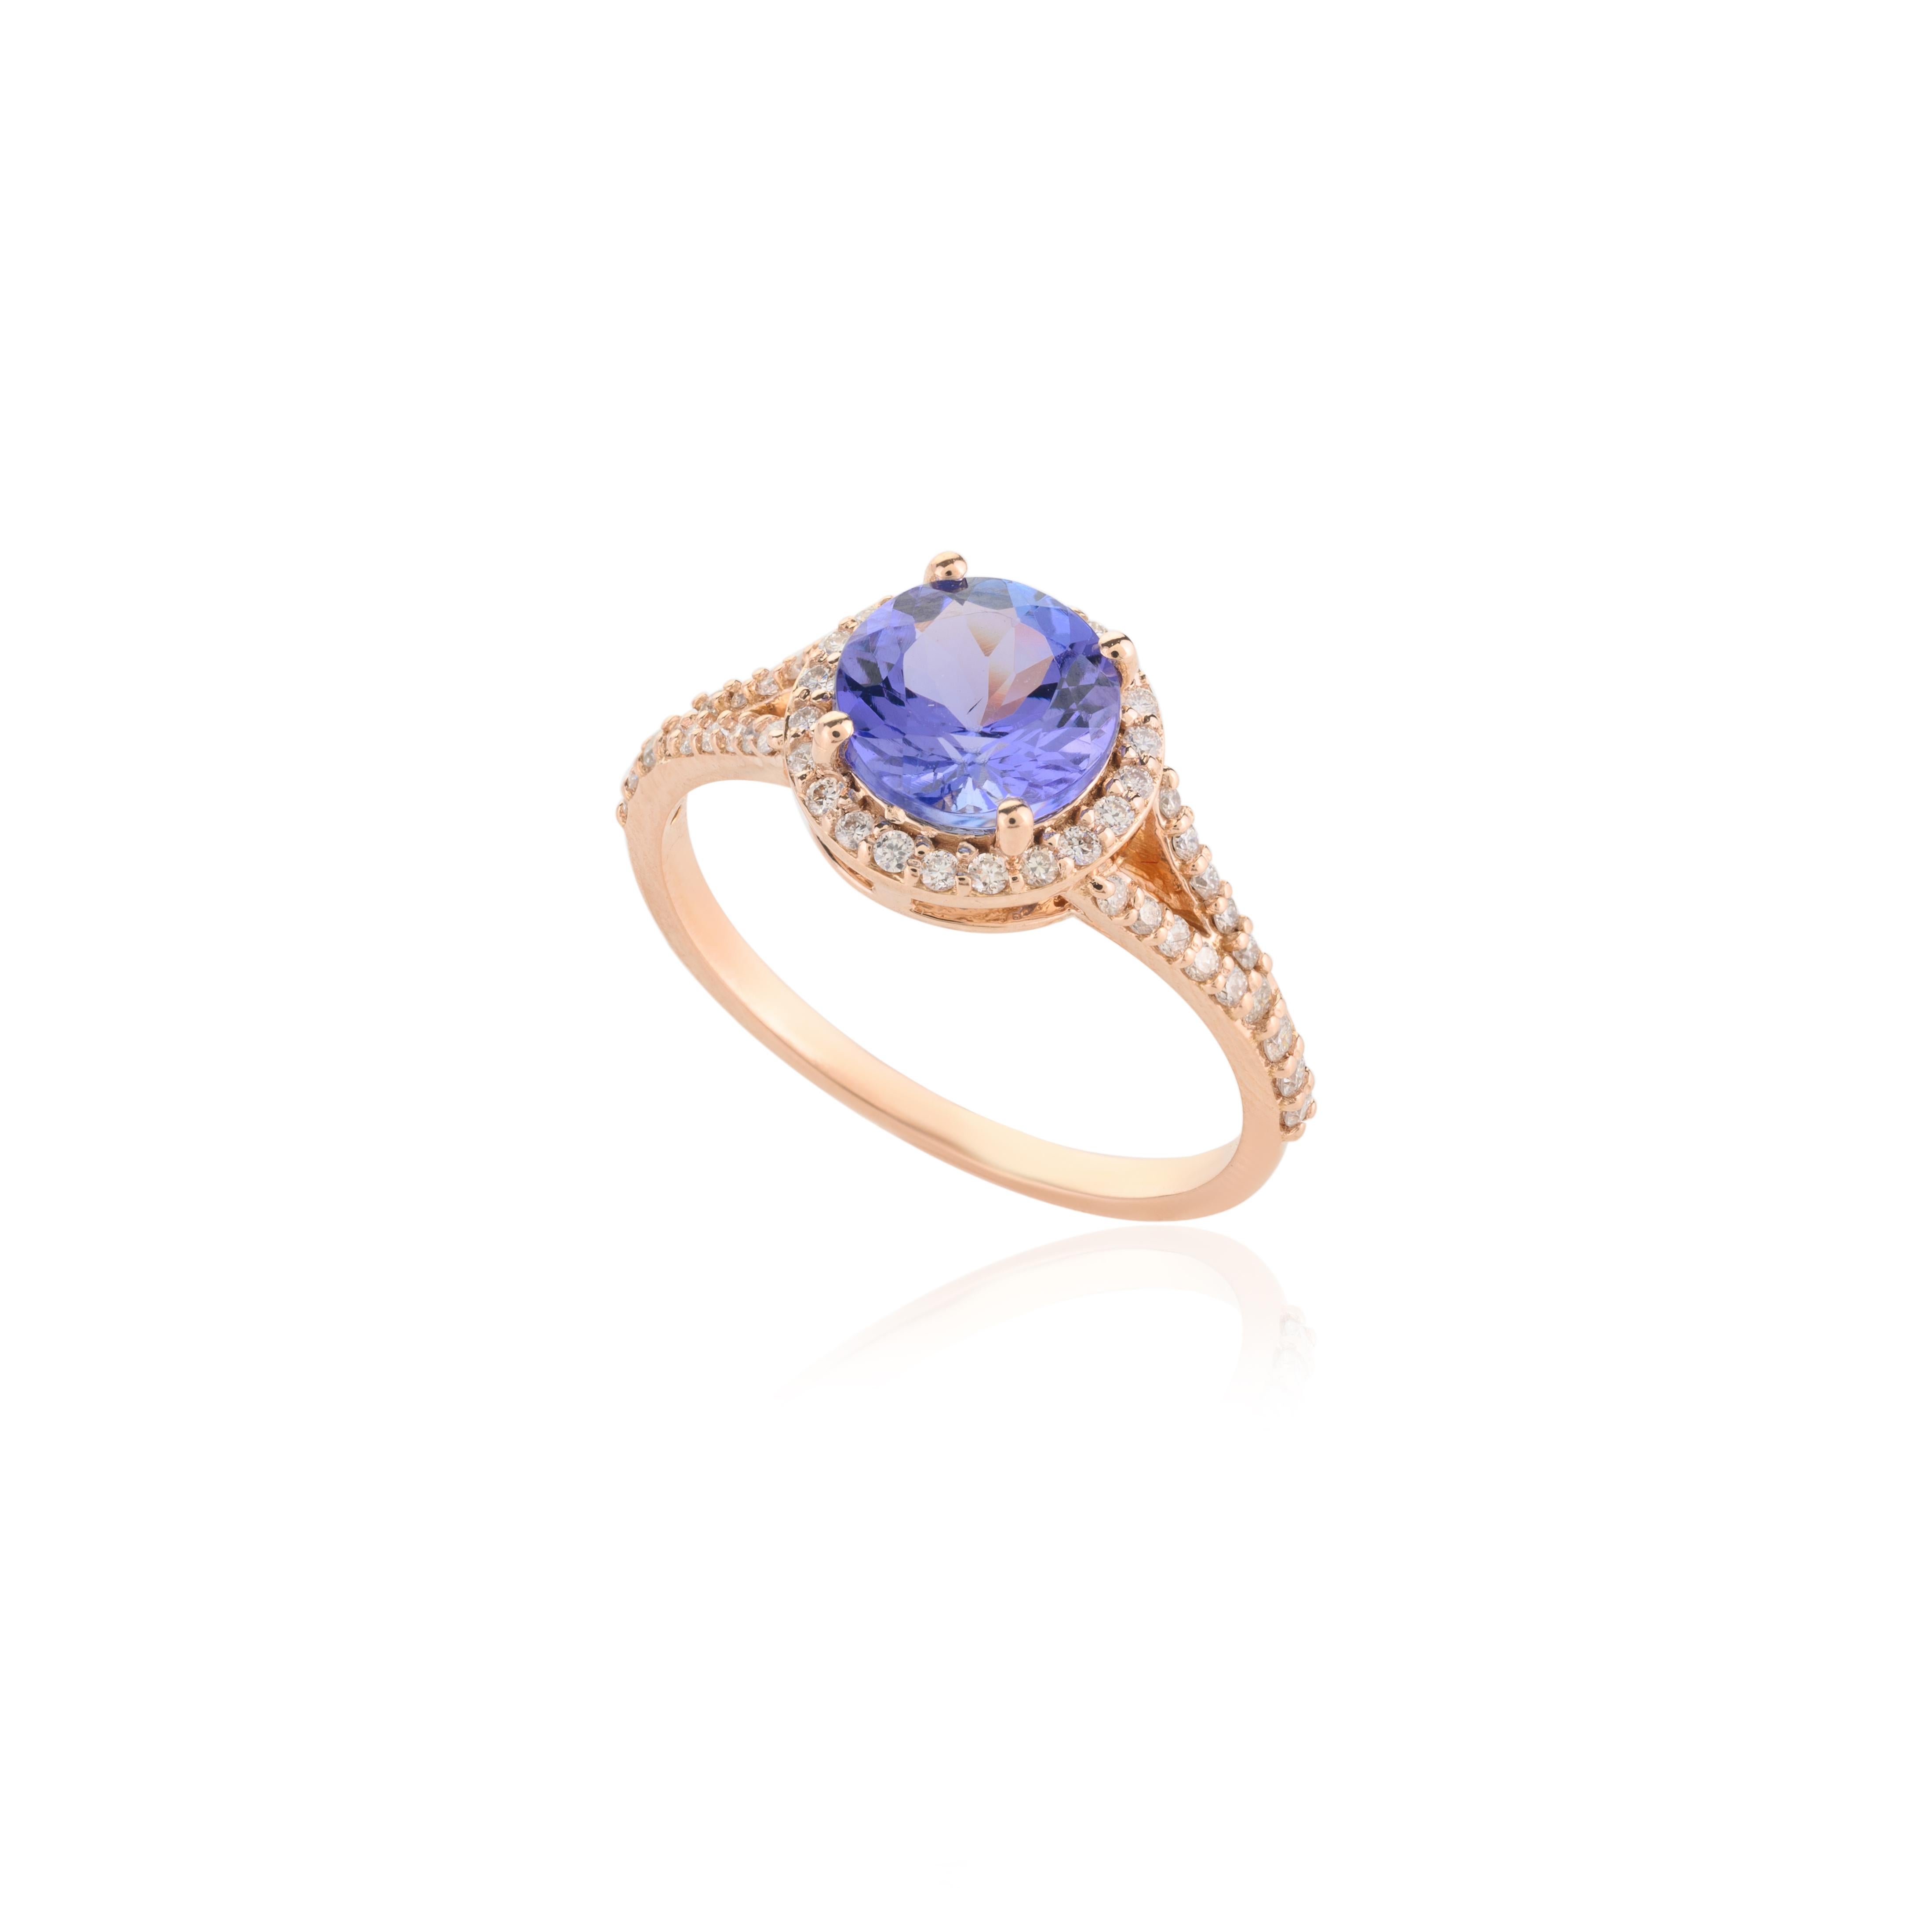 For Sale:  18k Solid Rose Gold Brilliant 1.47 CTW Tanzanite and Diamond Engagement Ring 7